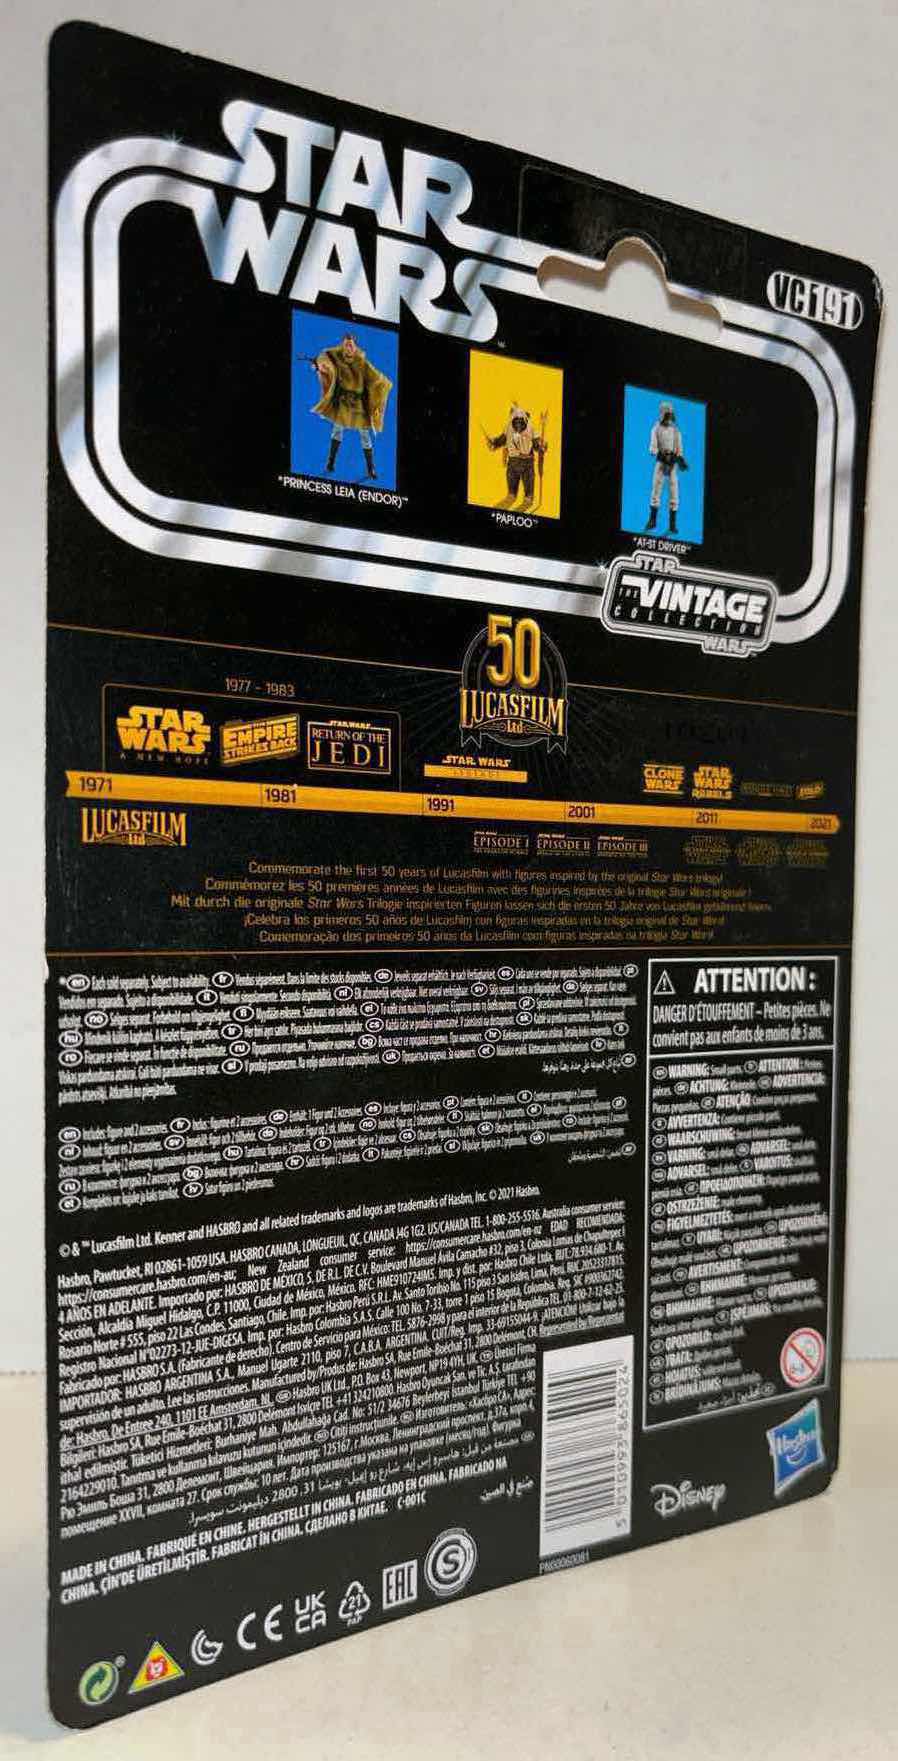 Photo 2 of NEW STAR WARS RETURN OF THE JEDI 3.75” THE VINTAGE COLLECTION ACTION FIGURE & ACCESSORIES, “PRINCESS LEIA (ENDOR)” (1)